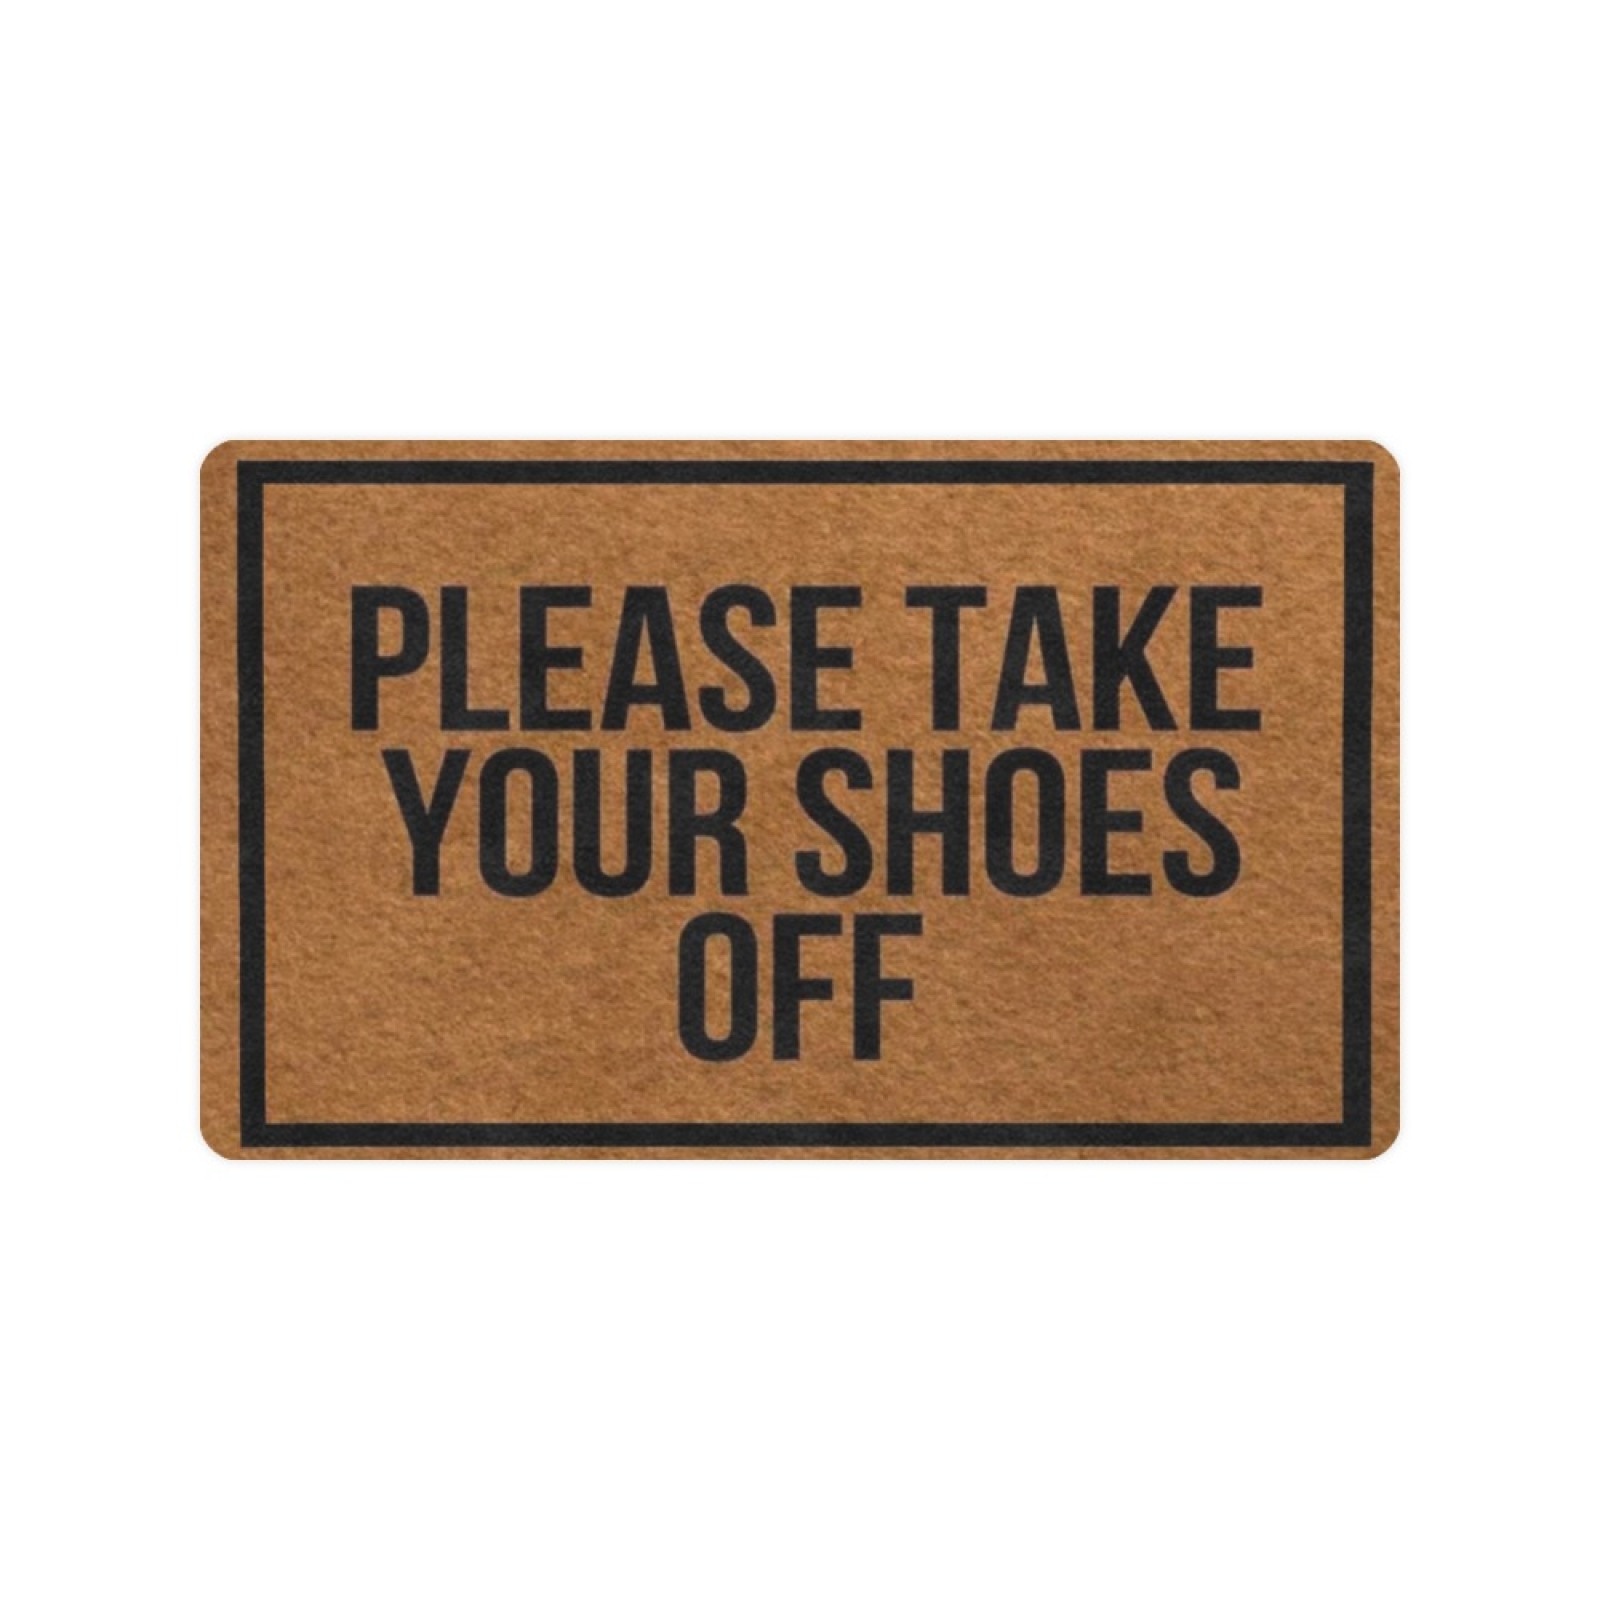 Please Take Your Shoes Off - Woven Outdoor Mat Design Doormat For Entrance Housewarming Christmas Rug (Rubber) 18 x 30